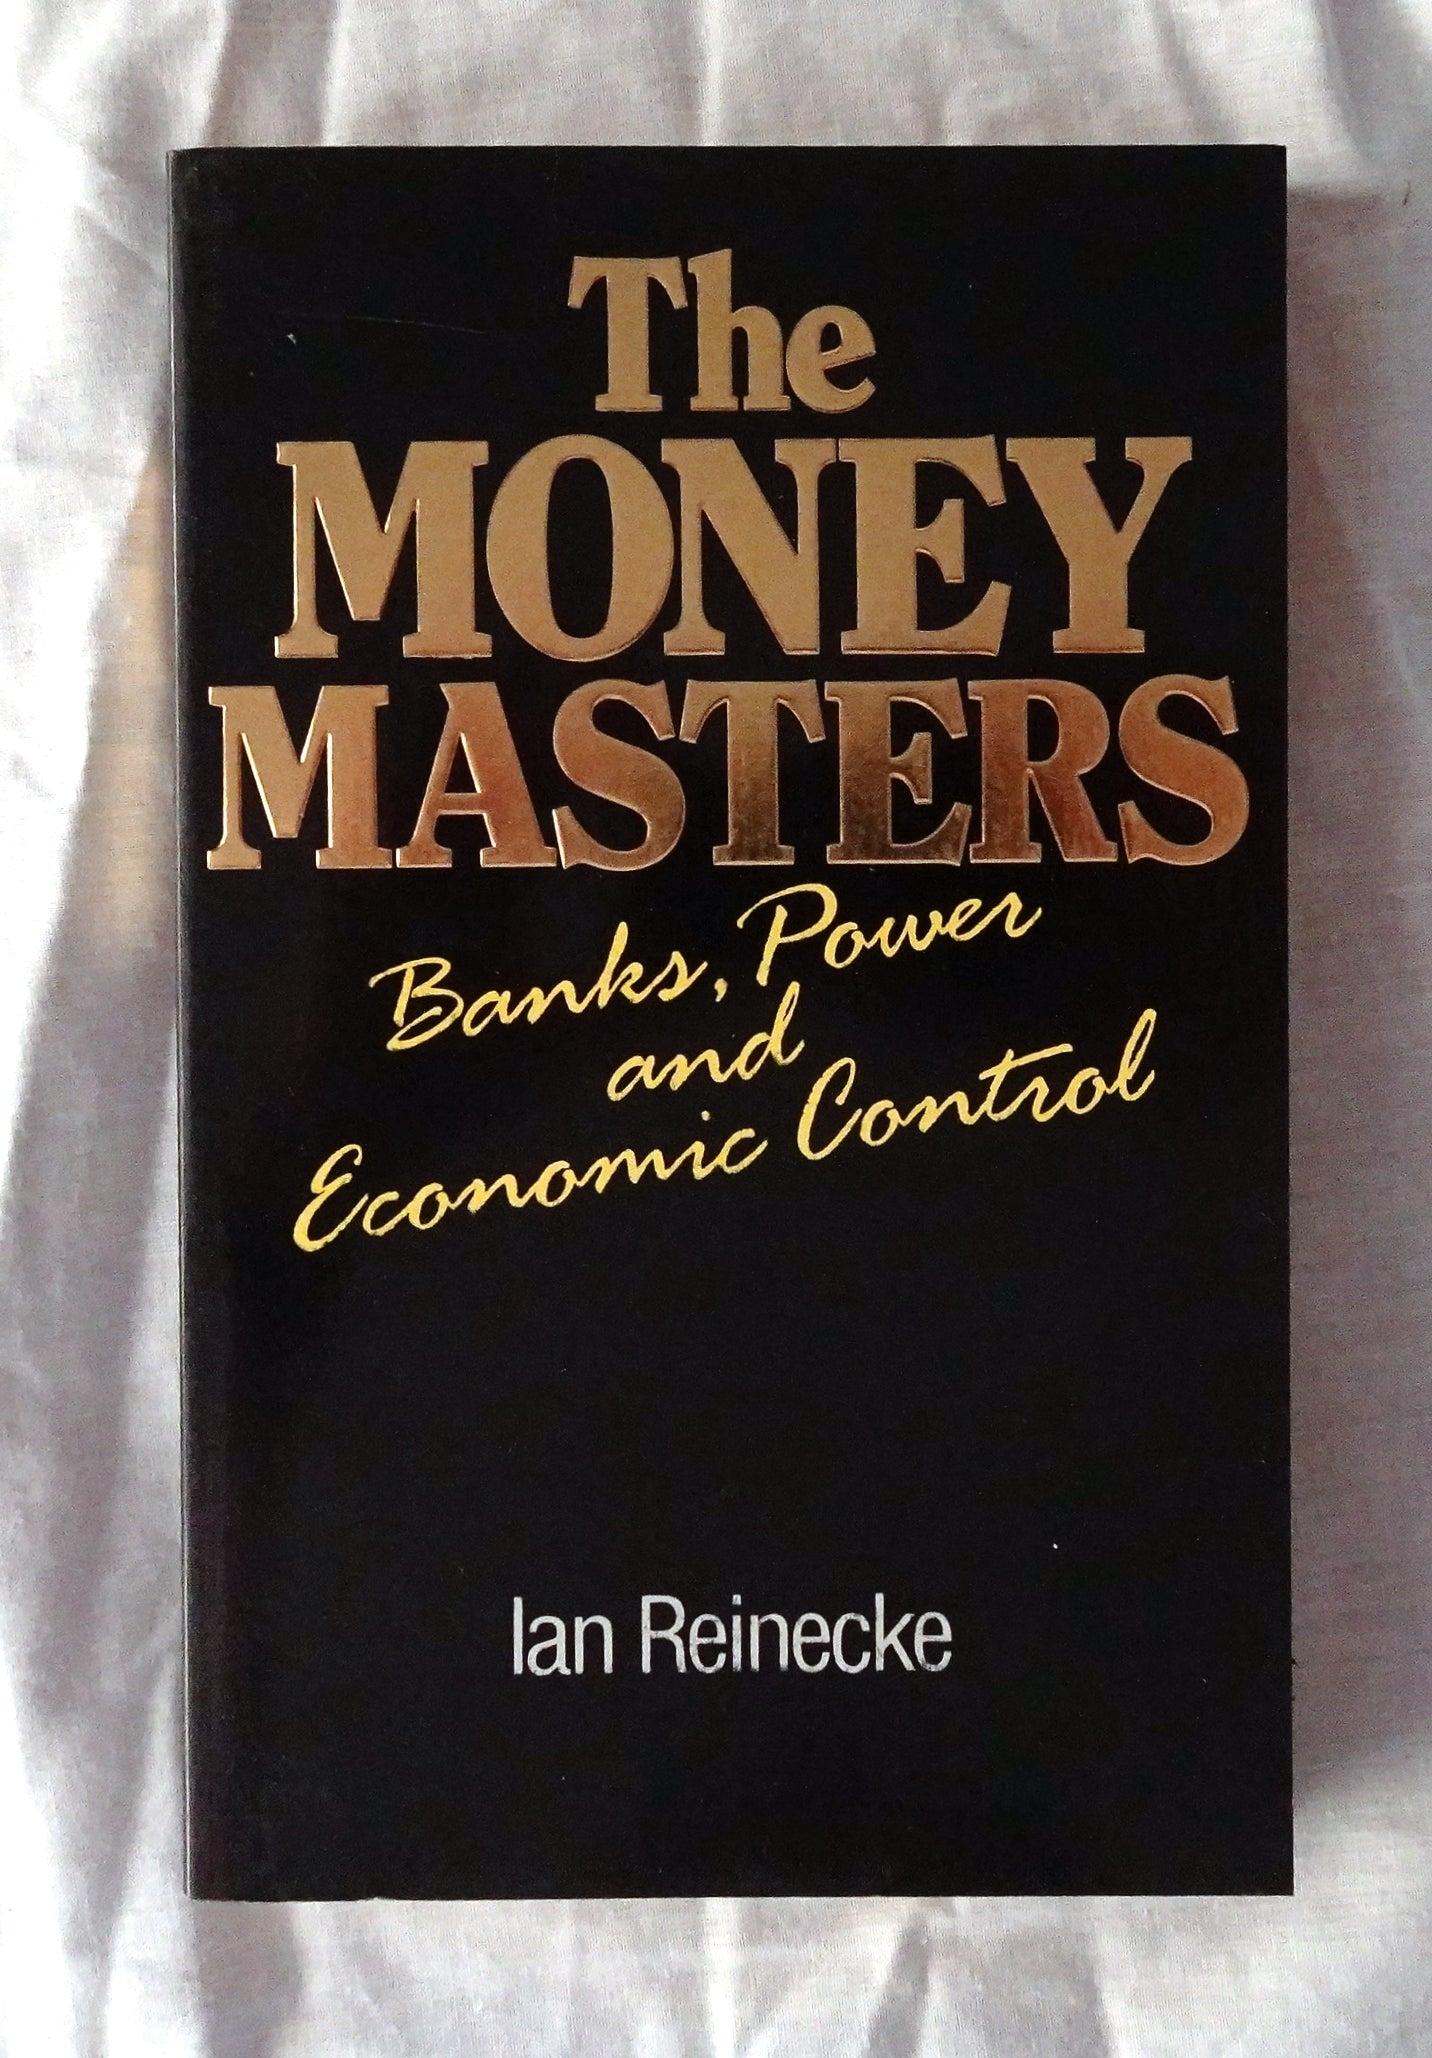 The Money Masters  Banks, Power and Economic Control  by Ian Reinecke